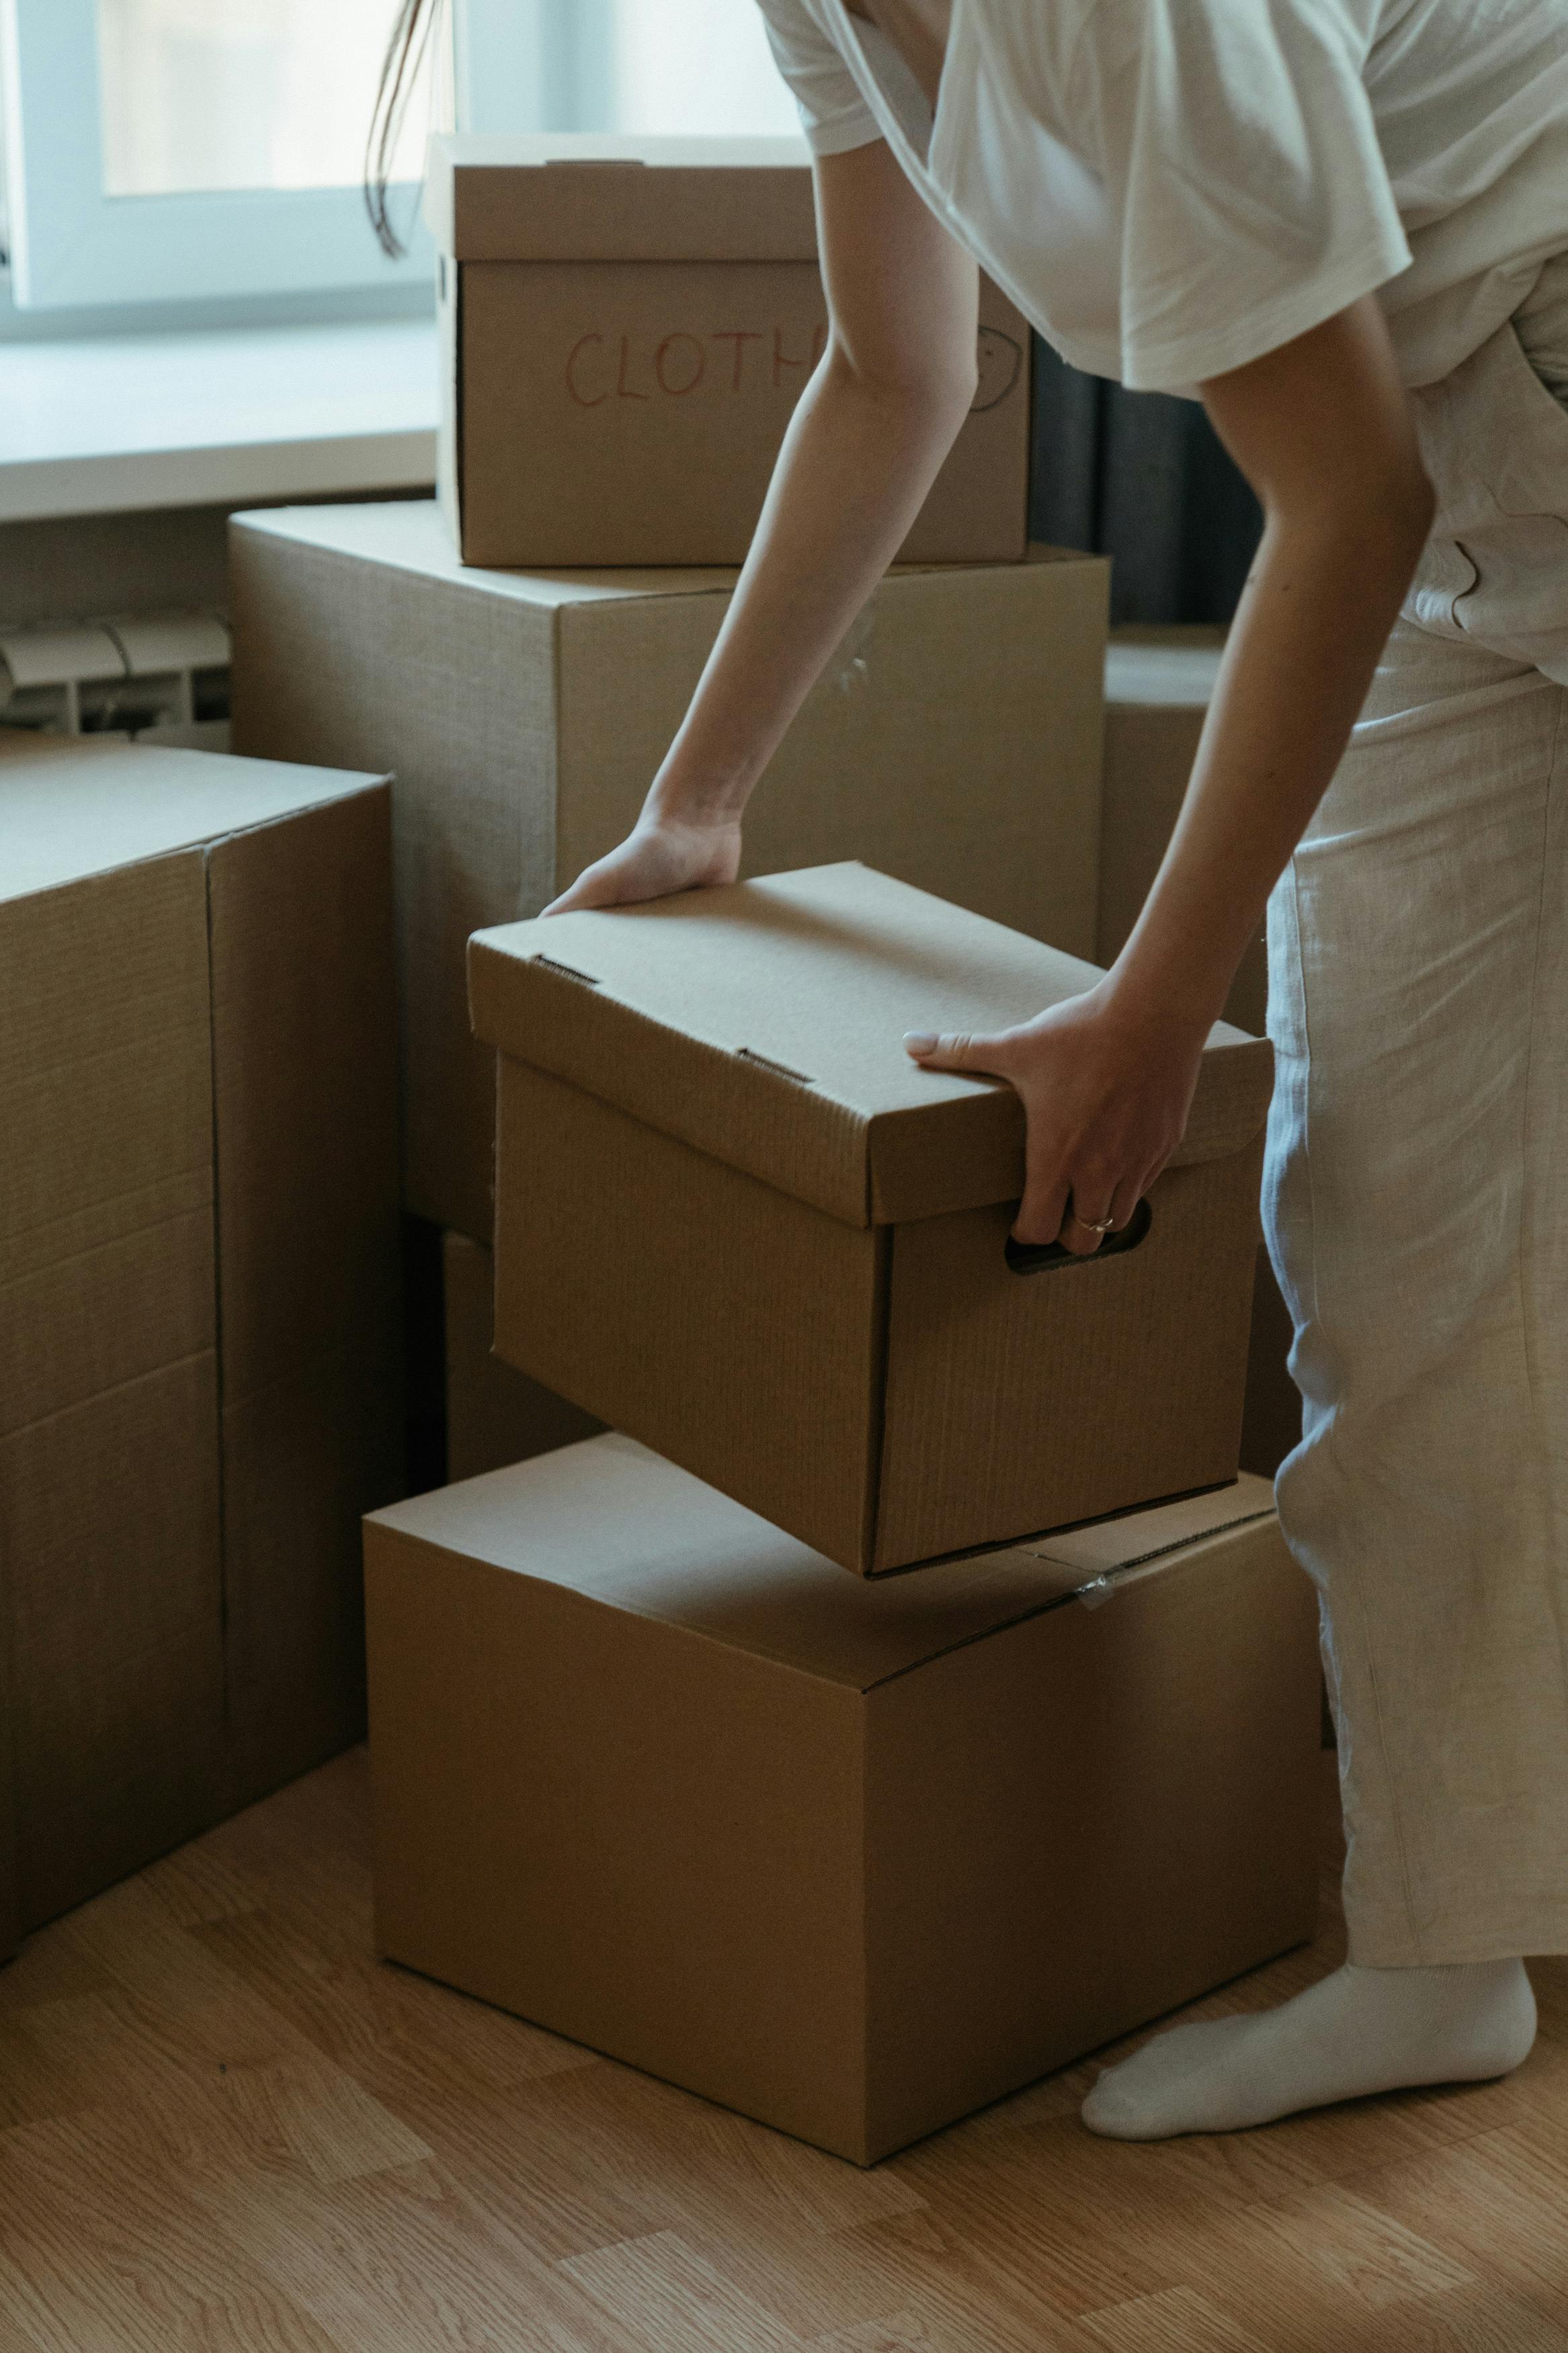 Woman stacking boxes | Source: Pexels